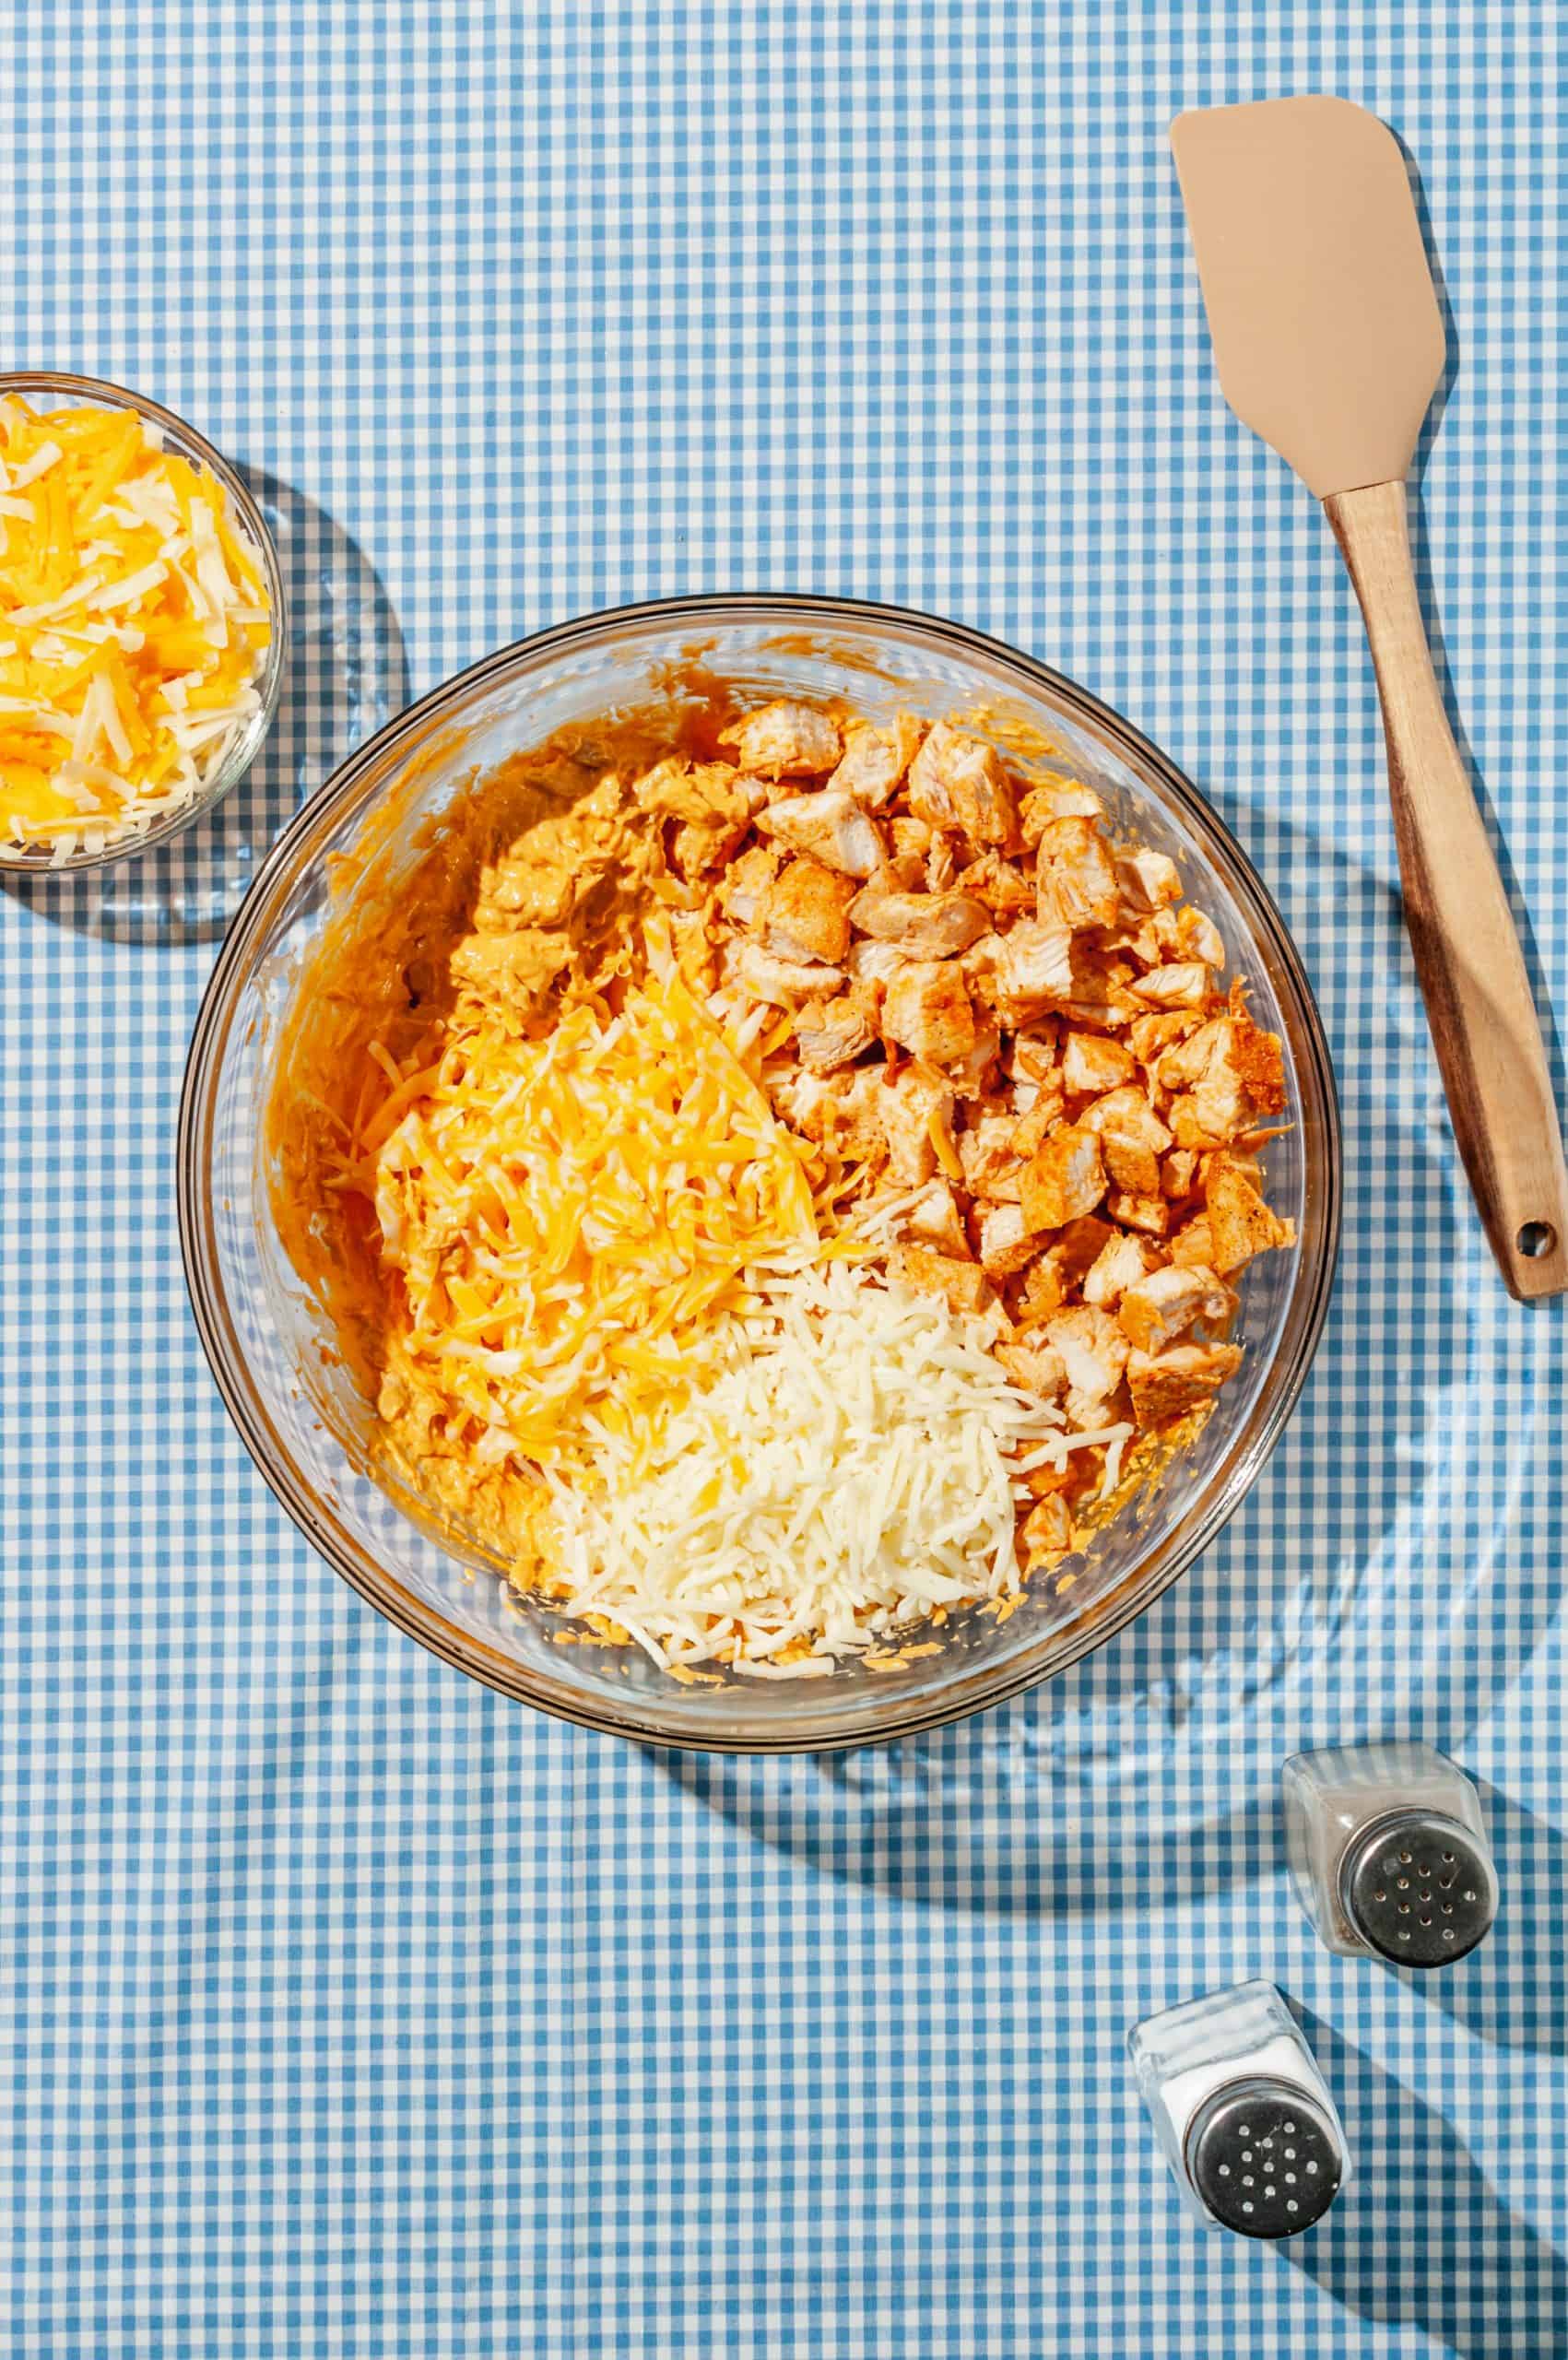 diced chicken, shredded cheese, and hot sauce mixture in a large mixing bowl